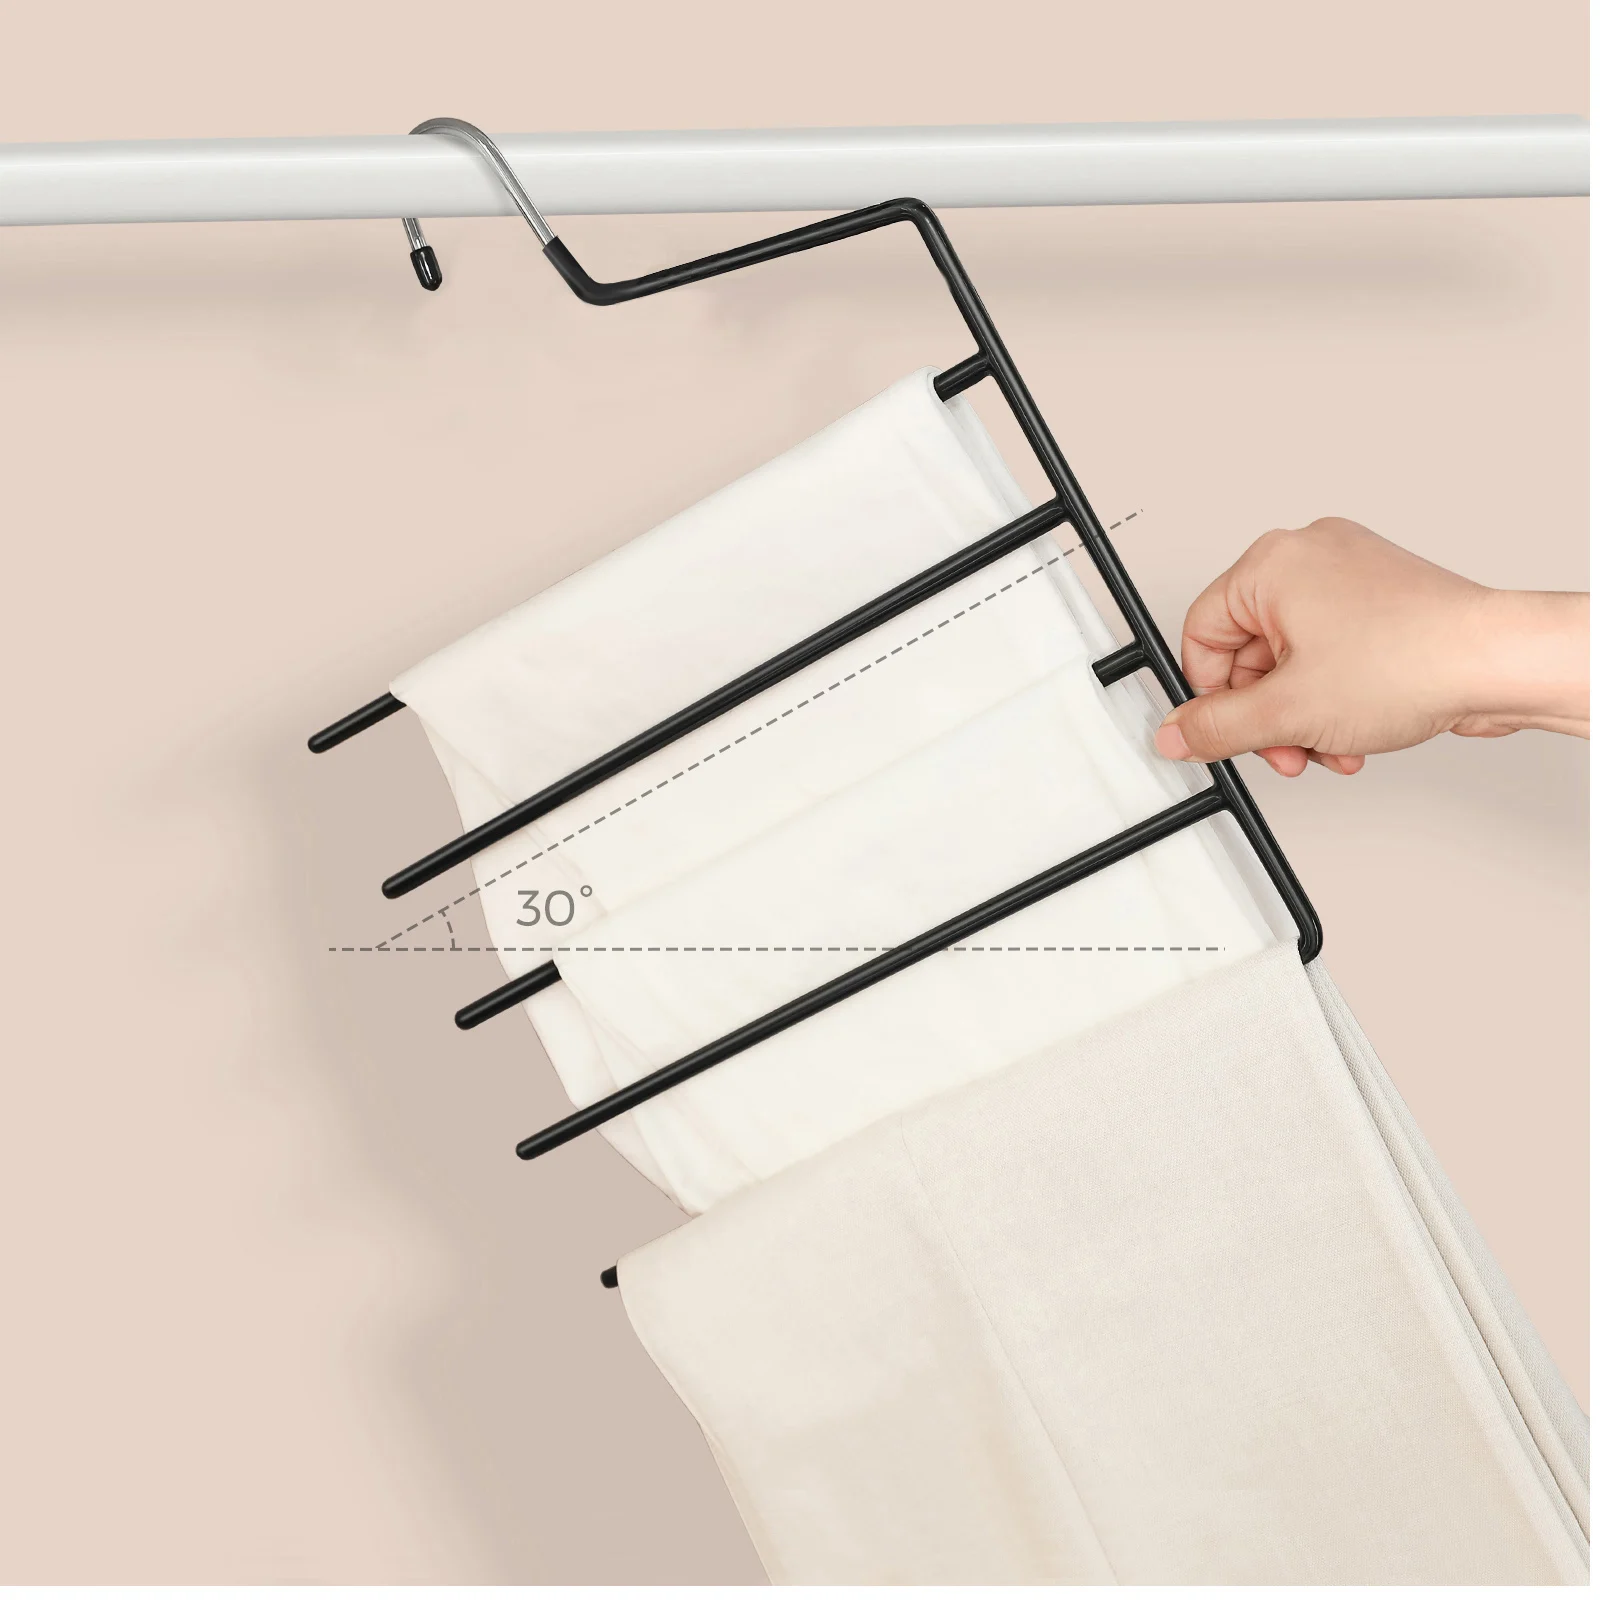 SONGMICS Non-Slip trousers organizer for Jeans Towels Scarves Set of 4 Open-Ended Trousers Hangers 5-Bar Clothes Hangers